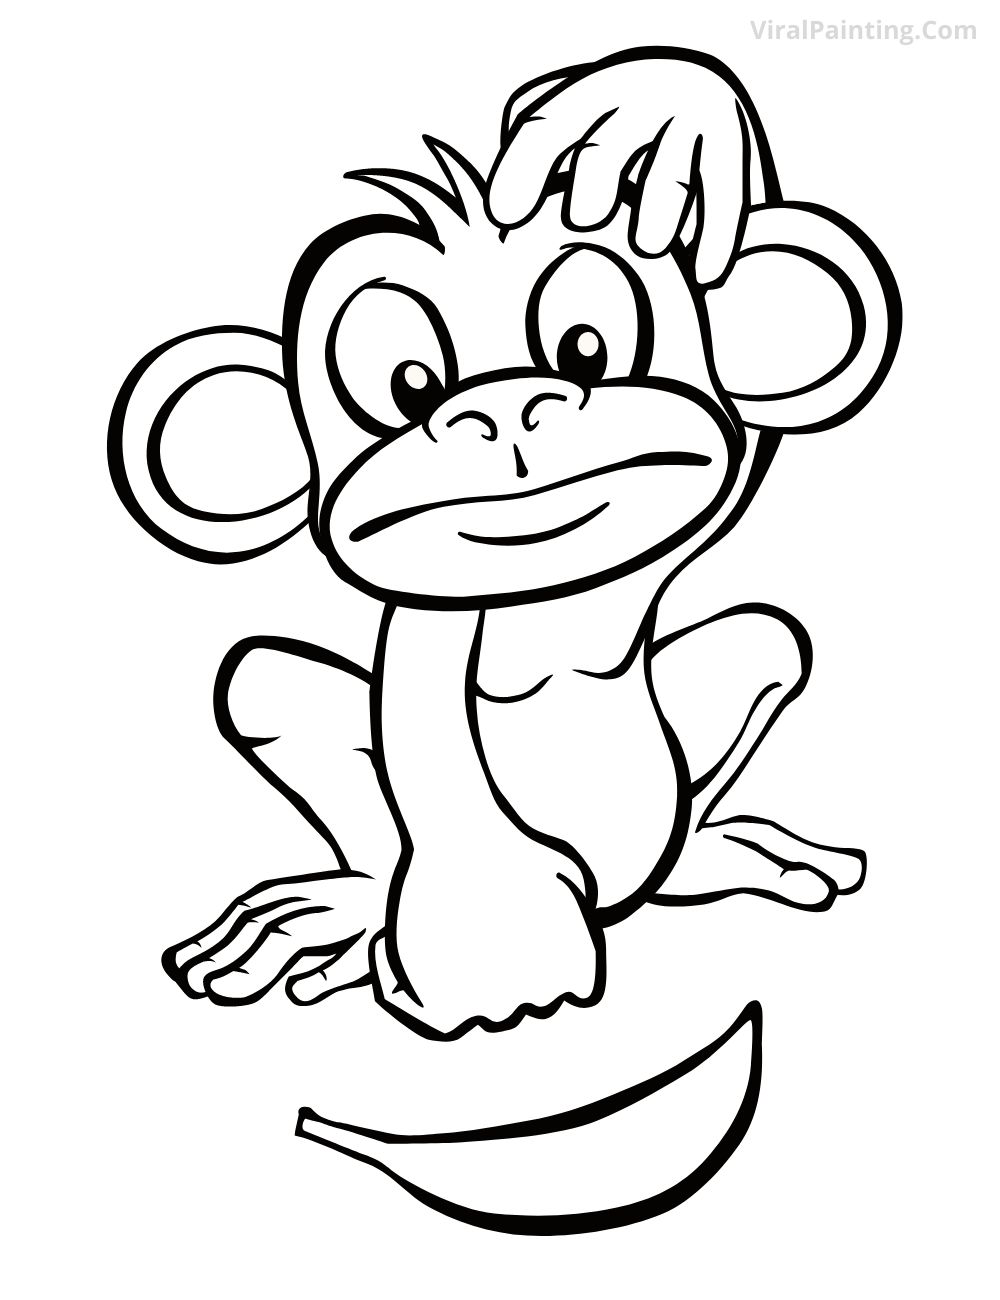 confused monkey drawing ideas 